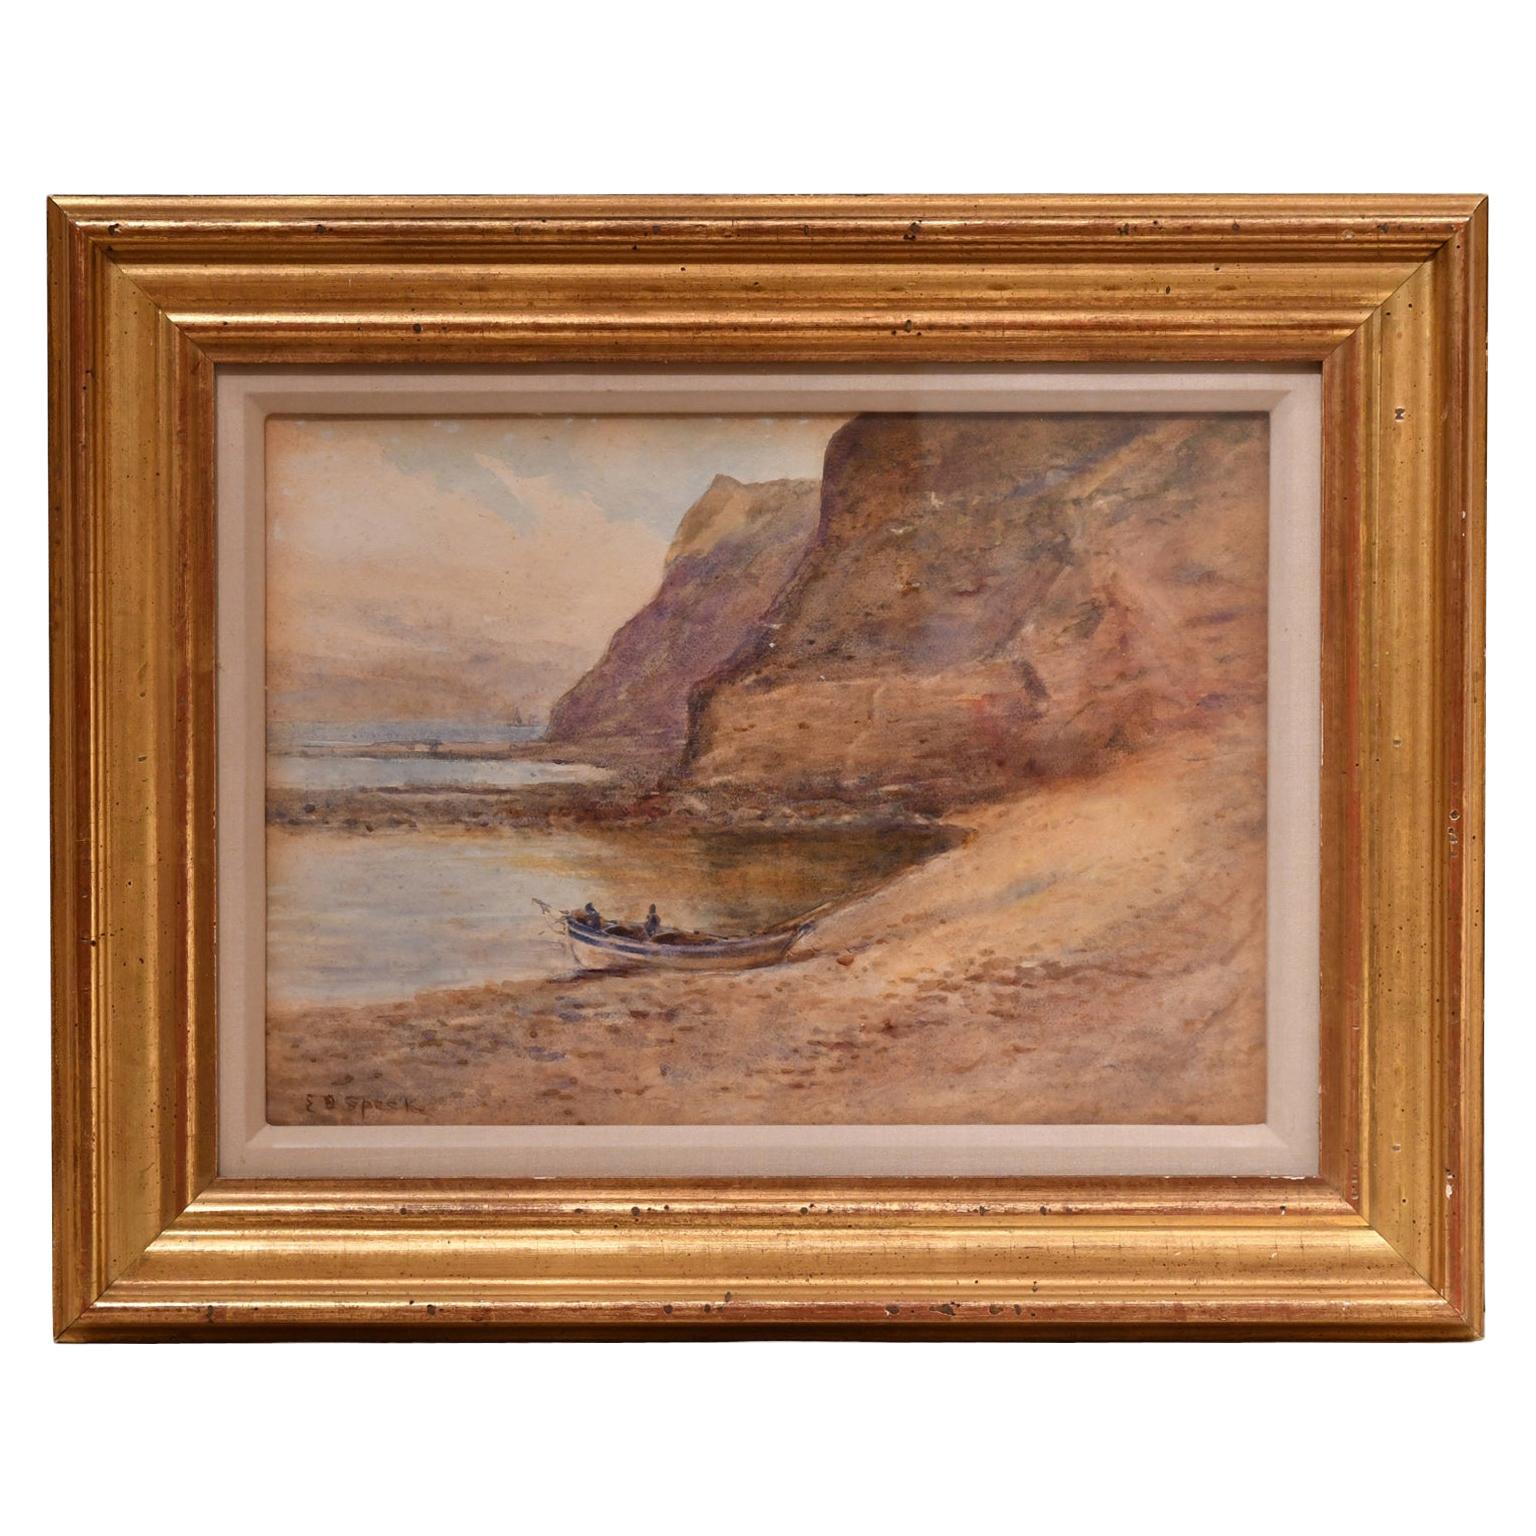 Watercolor of Boat in a Cove by Cliffs, Signed E. Ö. Speck in Gilded Frame